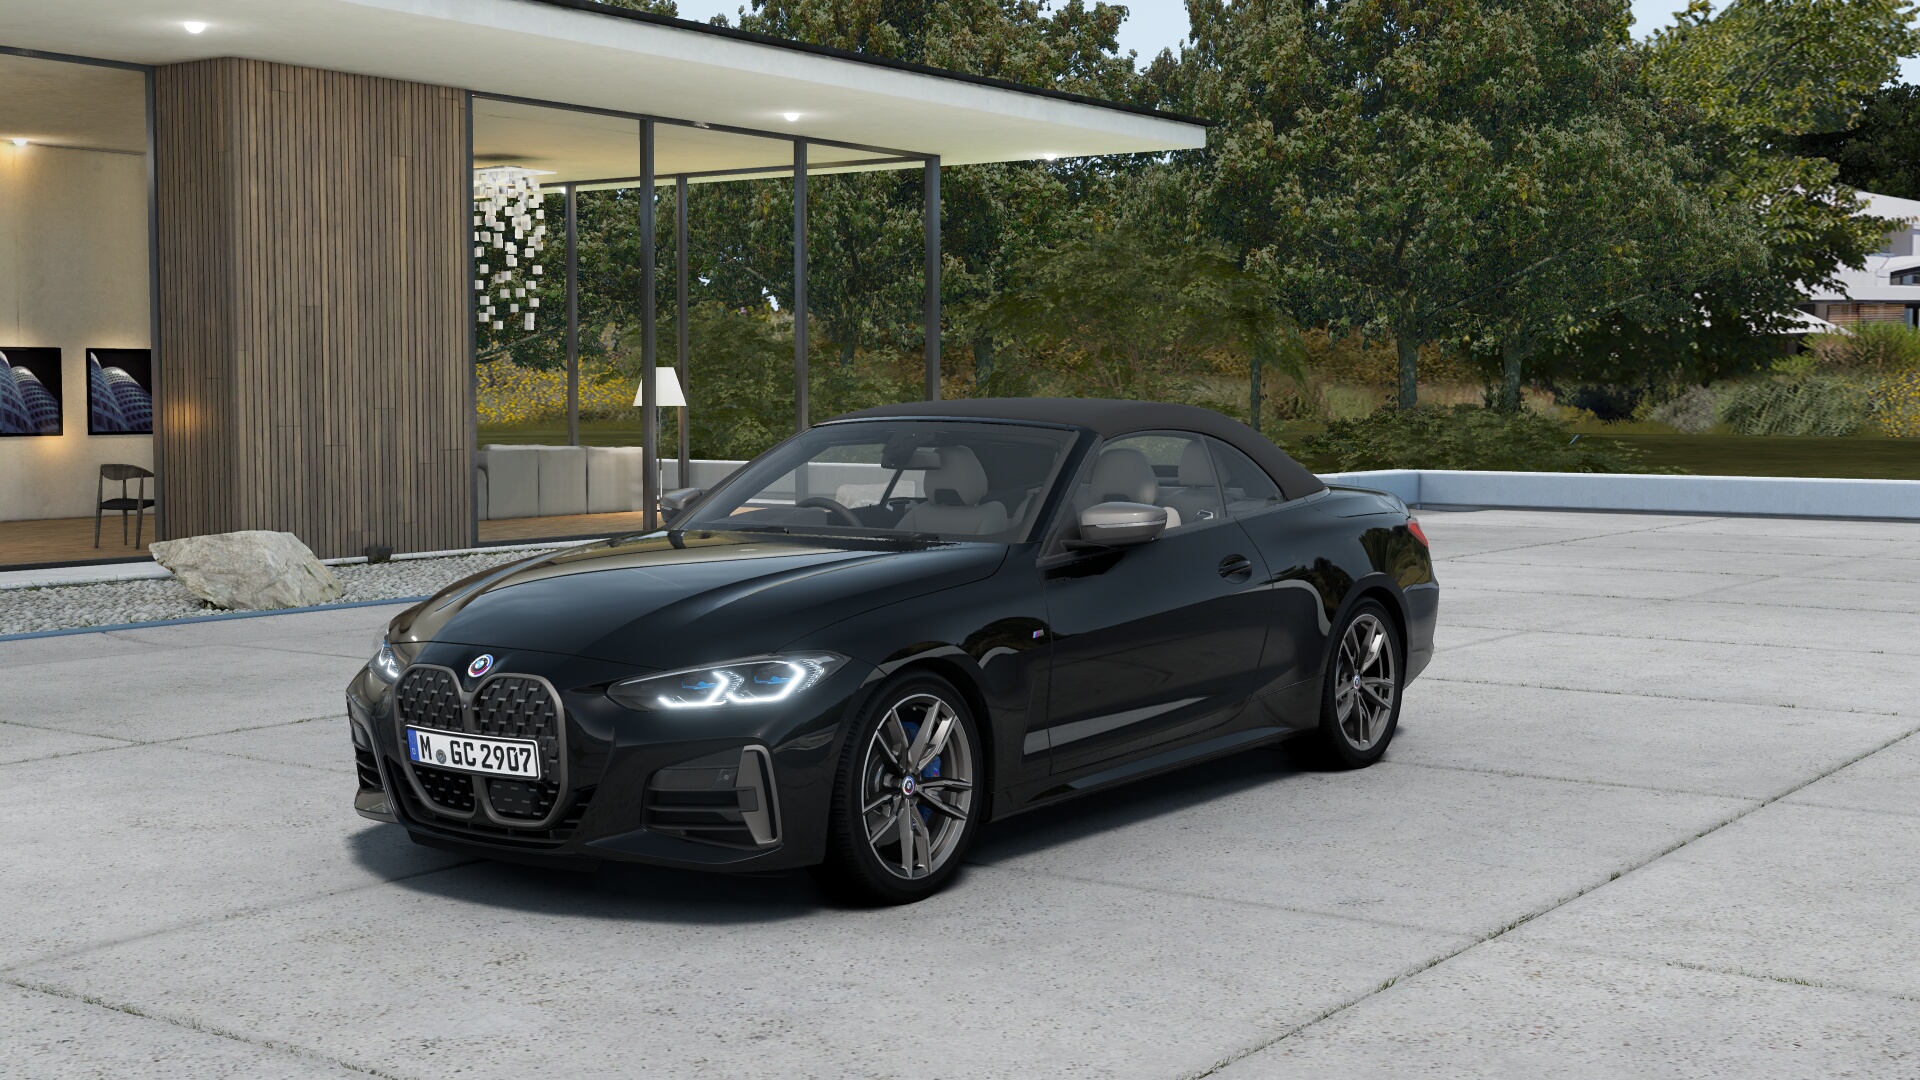 M440 xDrive Cabriolet